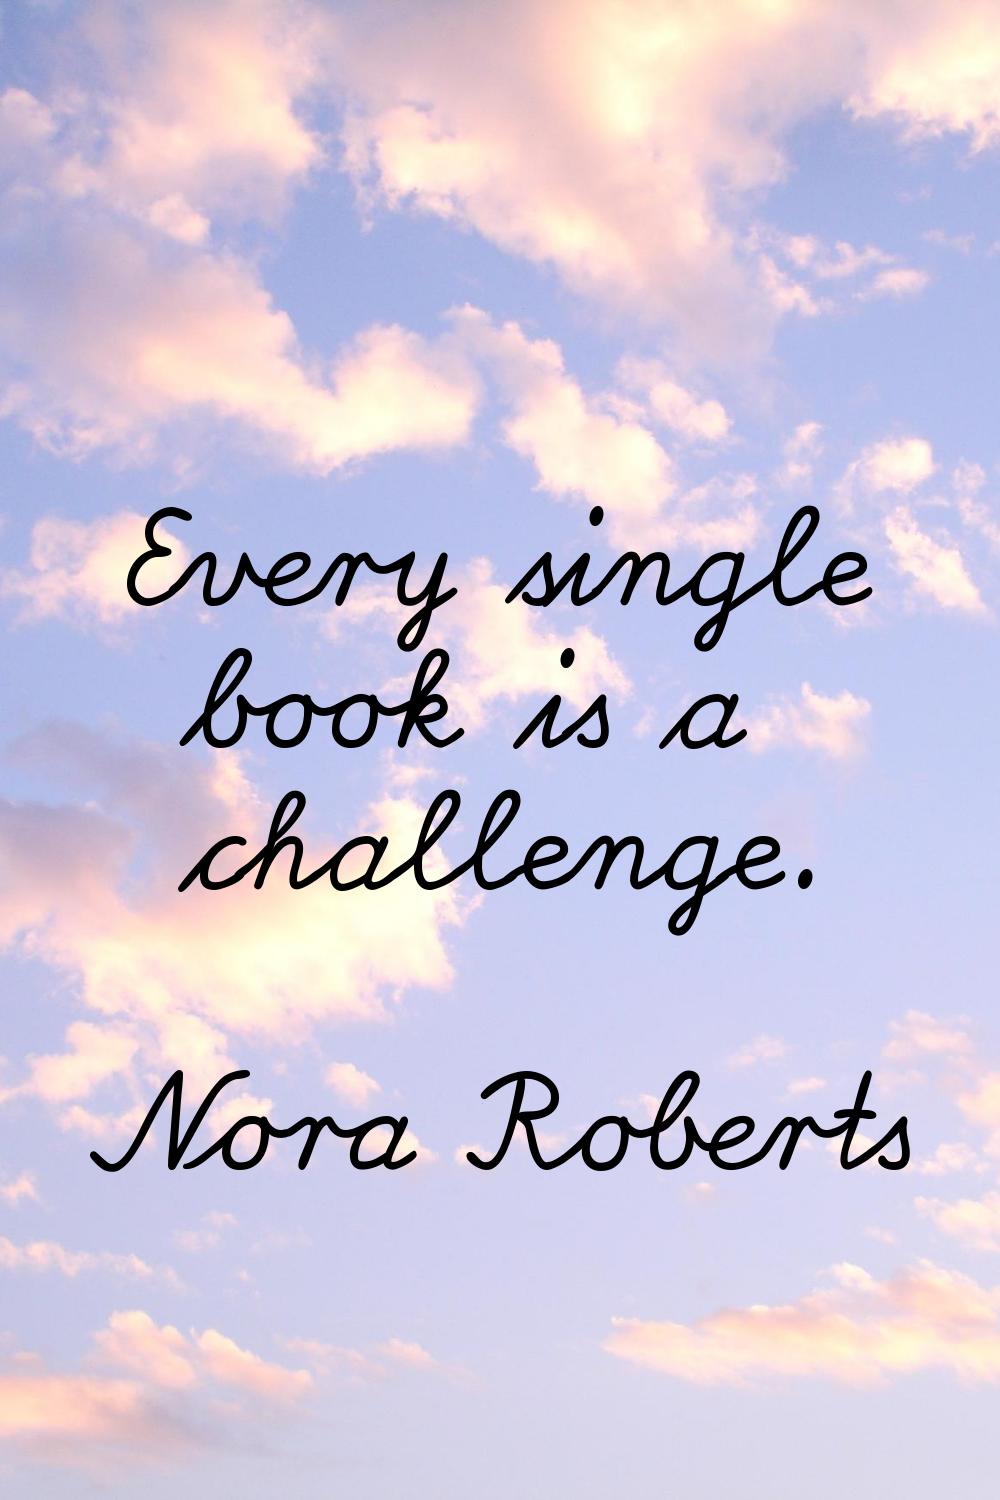 Every single book is a challenge.